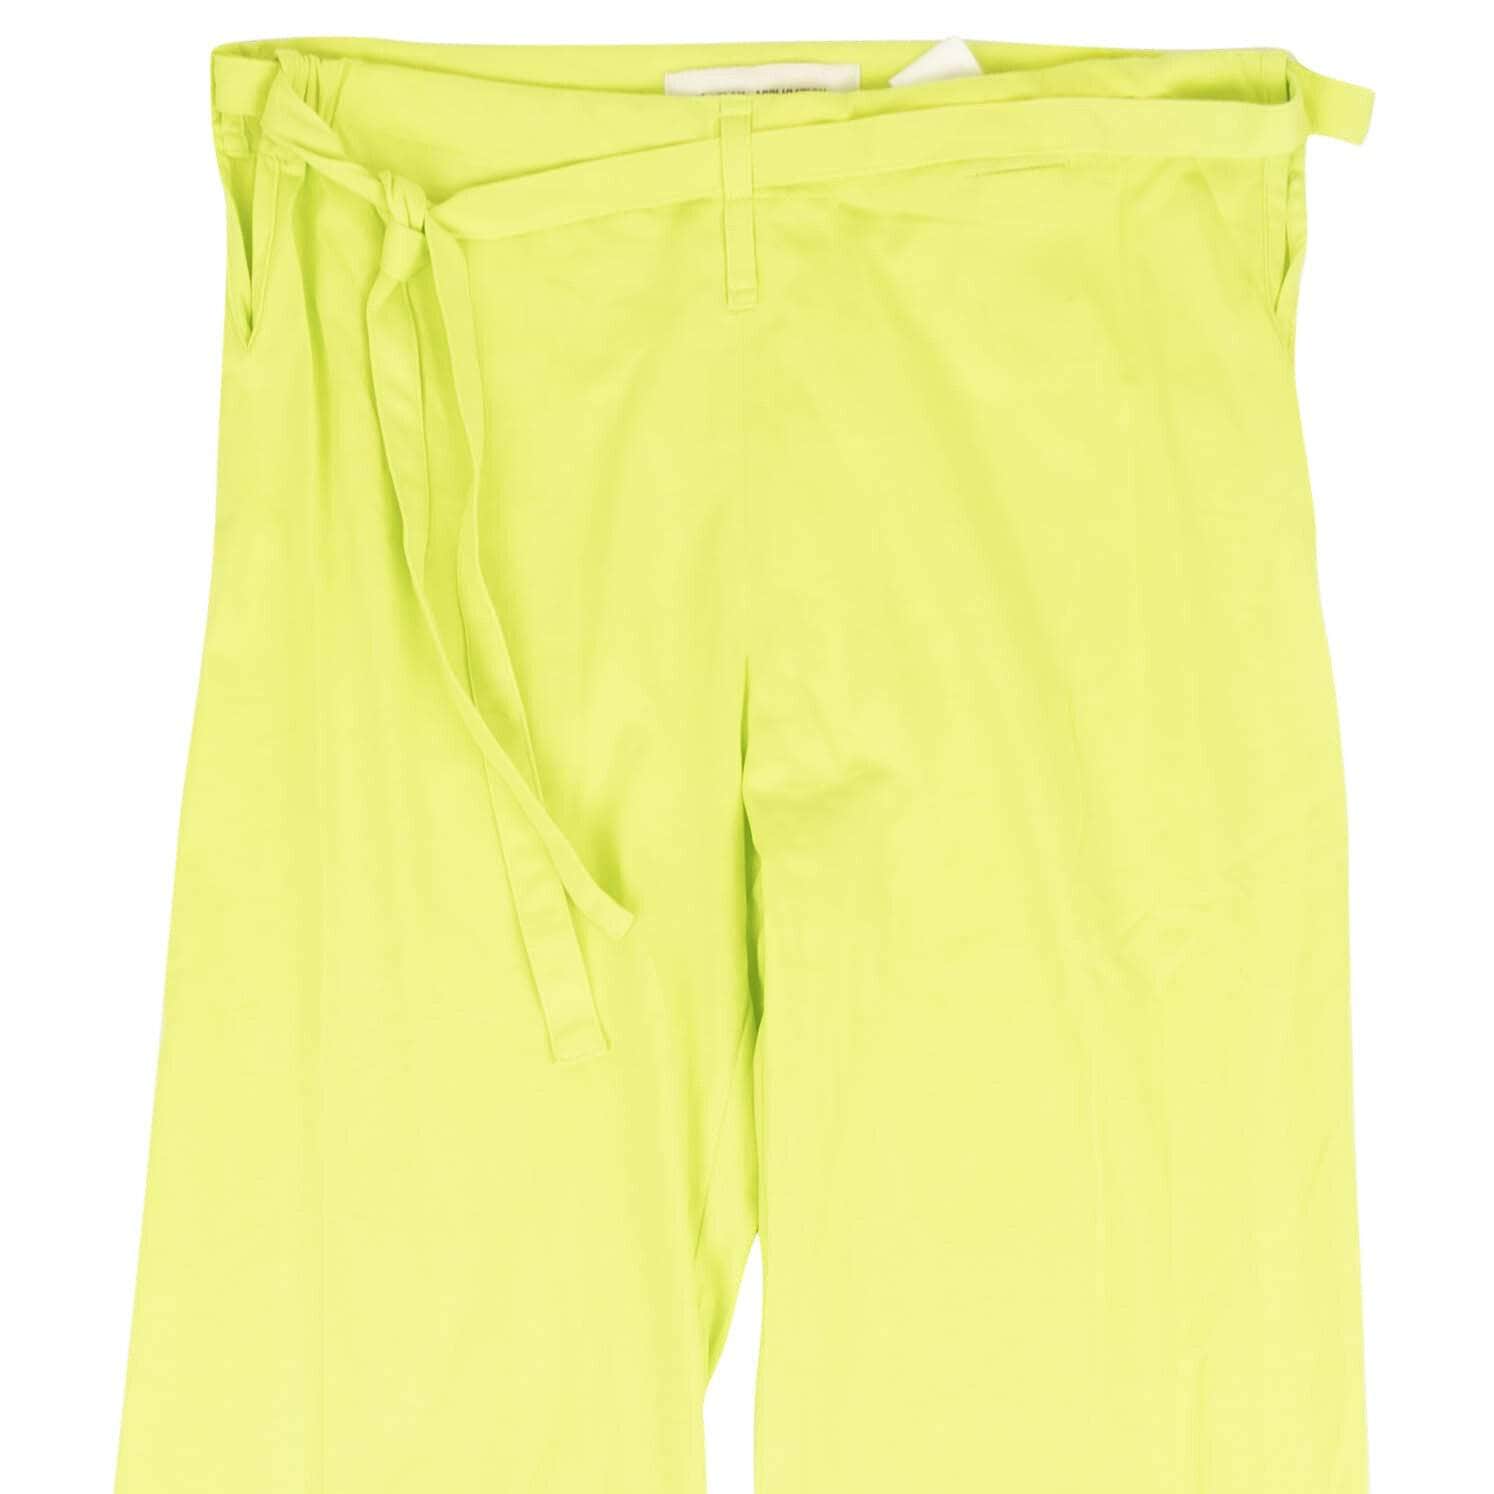 A_Plan_Application a_plan_application, channelenable-all, chicmi, couponcollection, gender-womens, main-clothing, size-s, under-250, womens-straight-pants S Neon Yellow Green Jersey Judo Pants 95-APA-1002/S 95-APA-1002/S